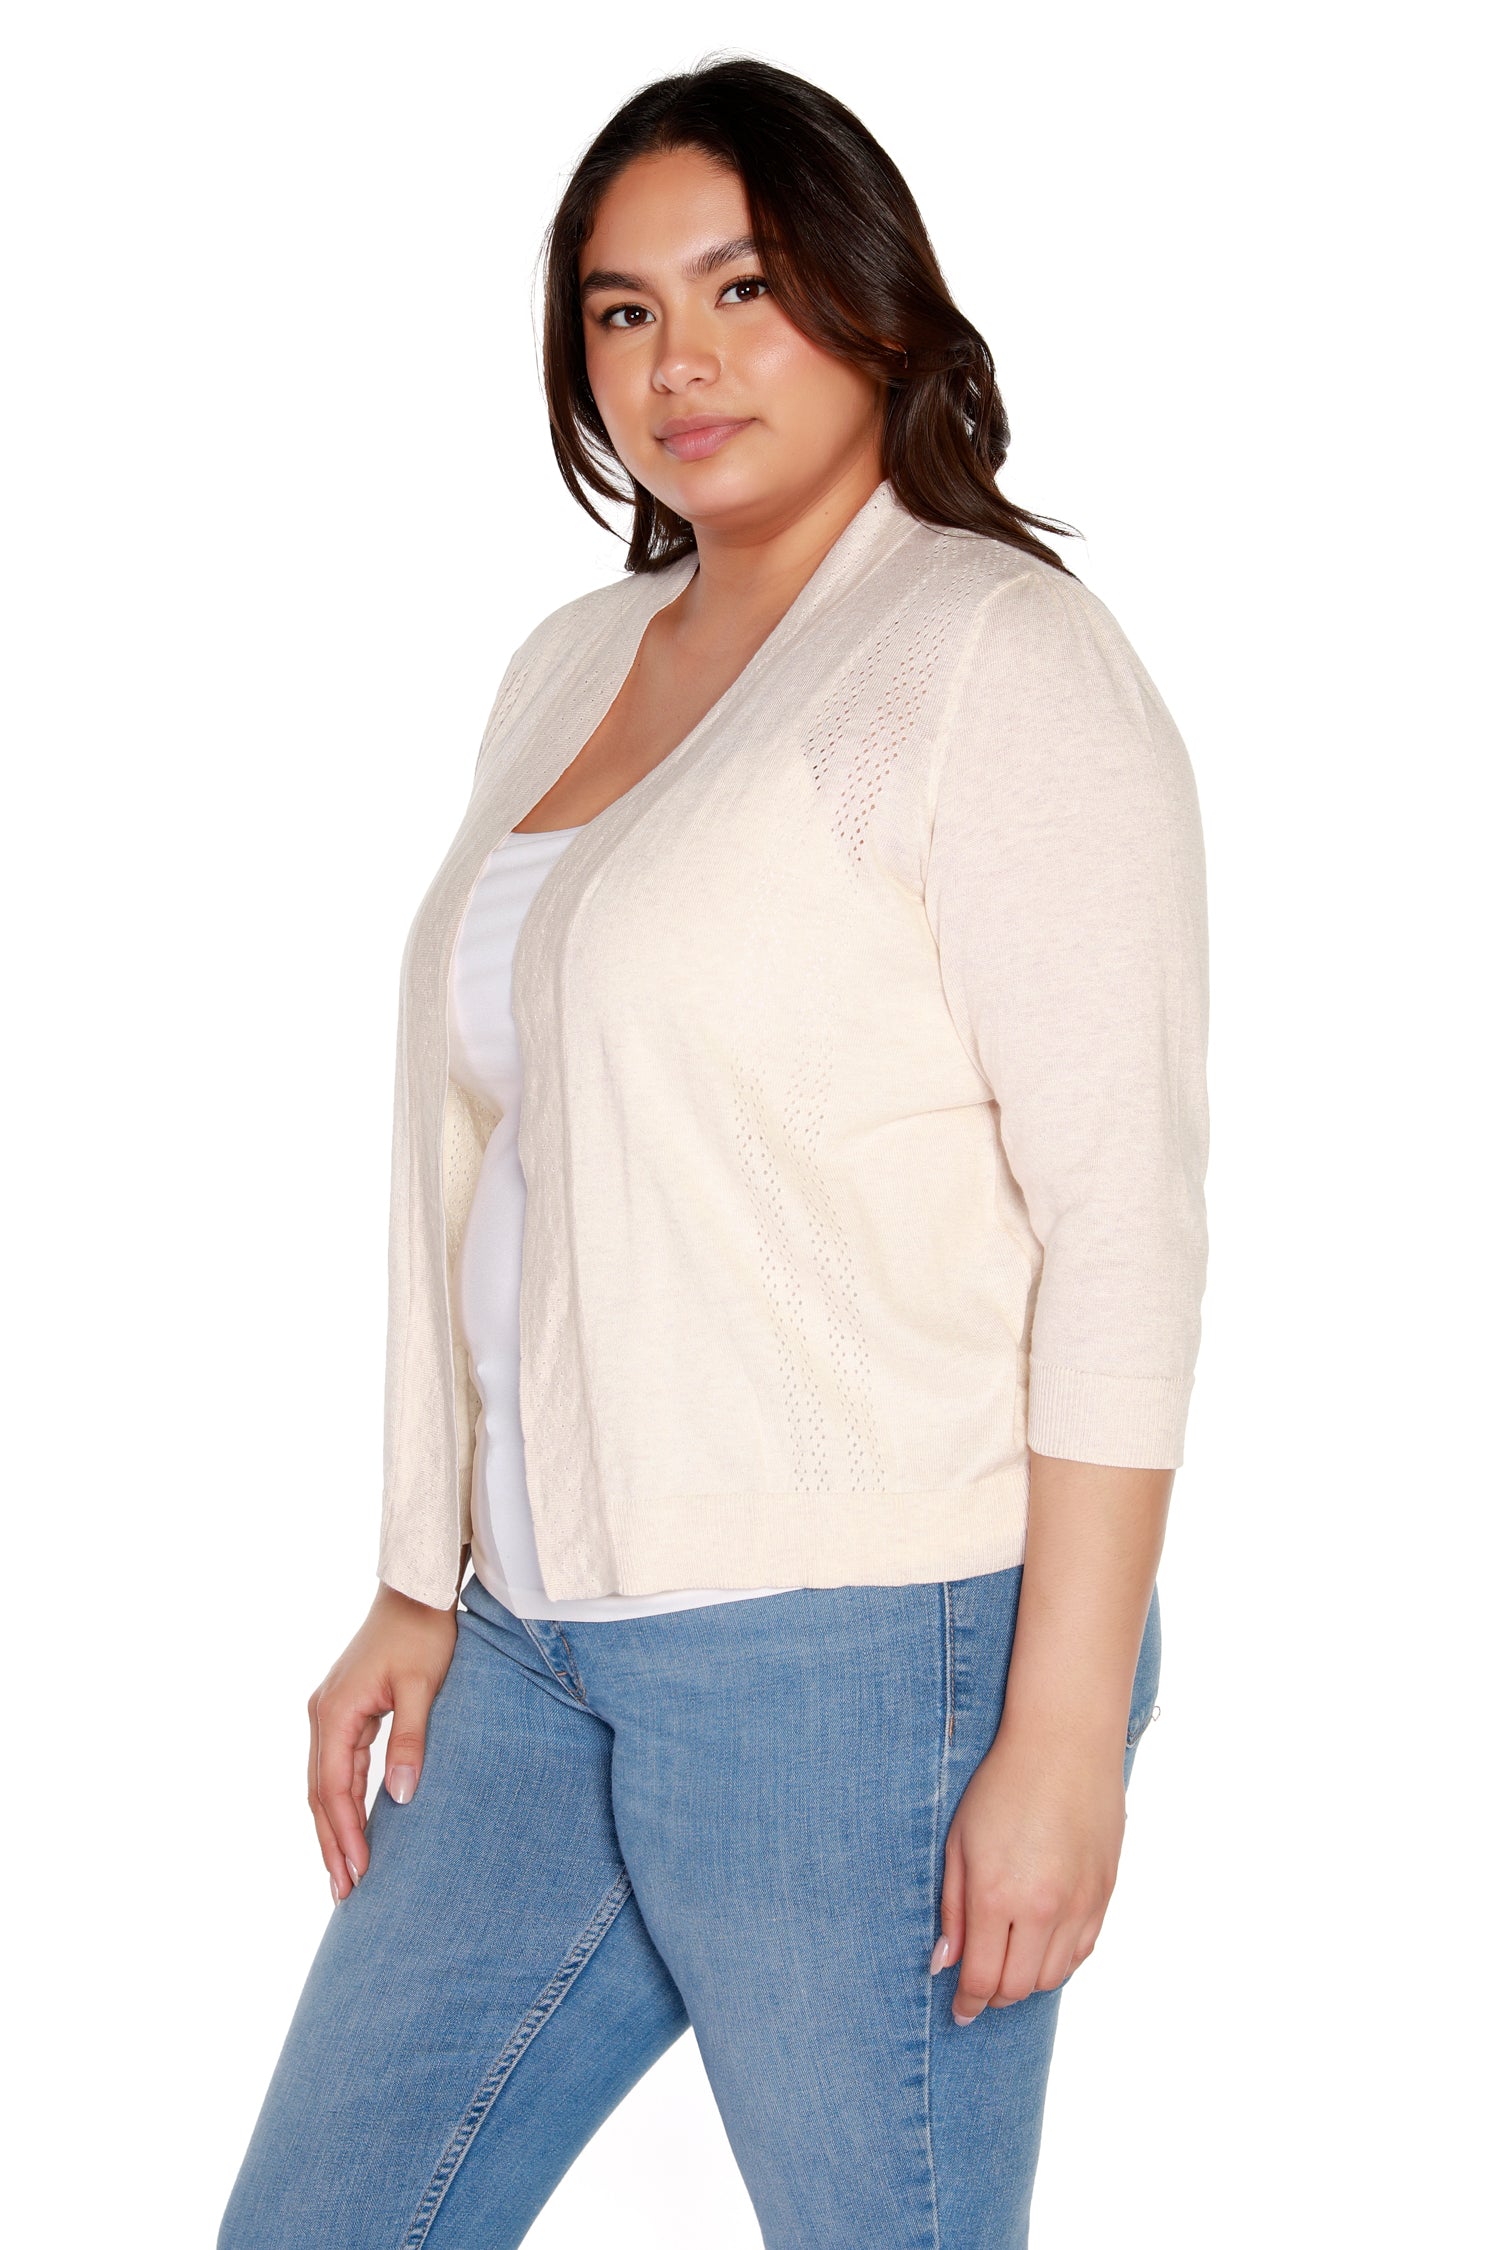 Women’s Cropped Cardigans with 3/4 Sleeves and Pointelle Stitch | Curvy